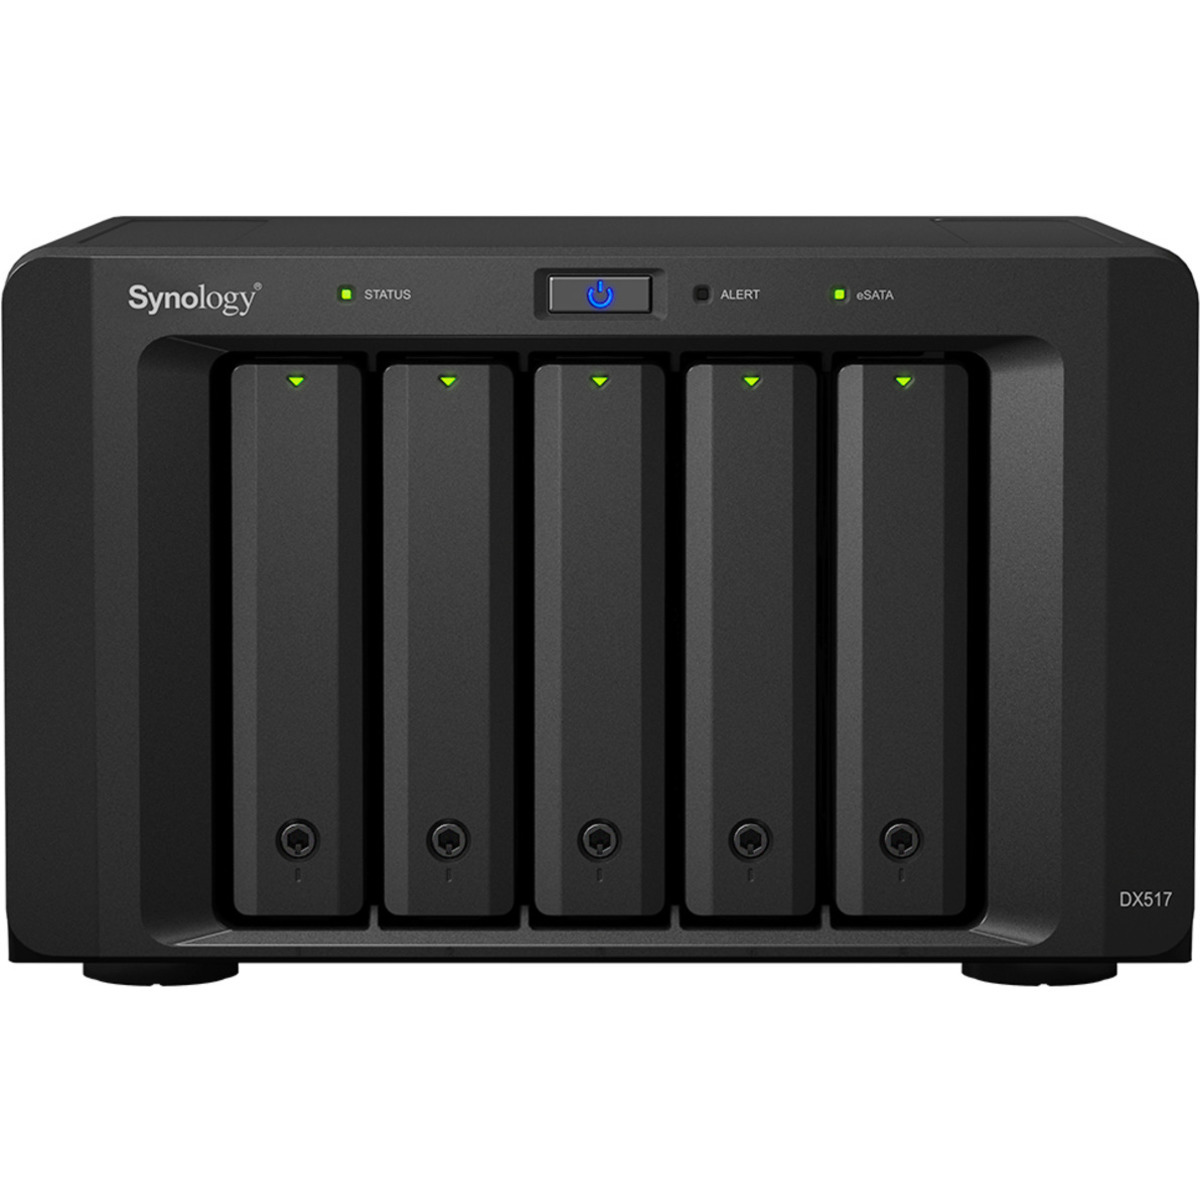 Synology DX517 External Expansion Drive 3tb 5-Bay Desktop Multimedia / Power User / Business Expansion Enclosure 3x1tb Western Digital Red SA500 WDS100T1R0A 2.5 560/530MB/s SATA 6Gb/s SSD NAS Class Drives Installed - Burn-In Tested DX517 External Expansion Drive